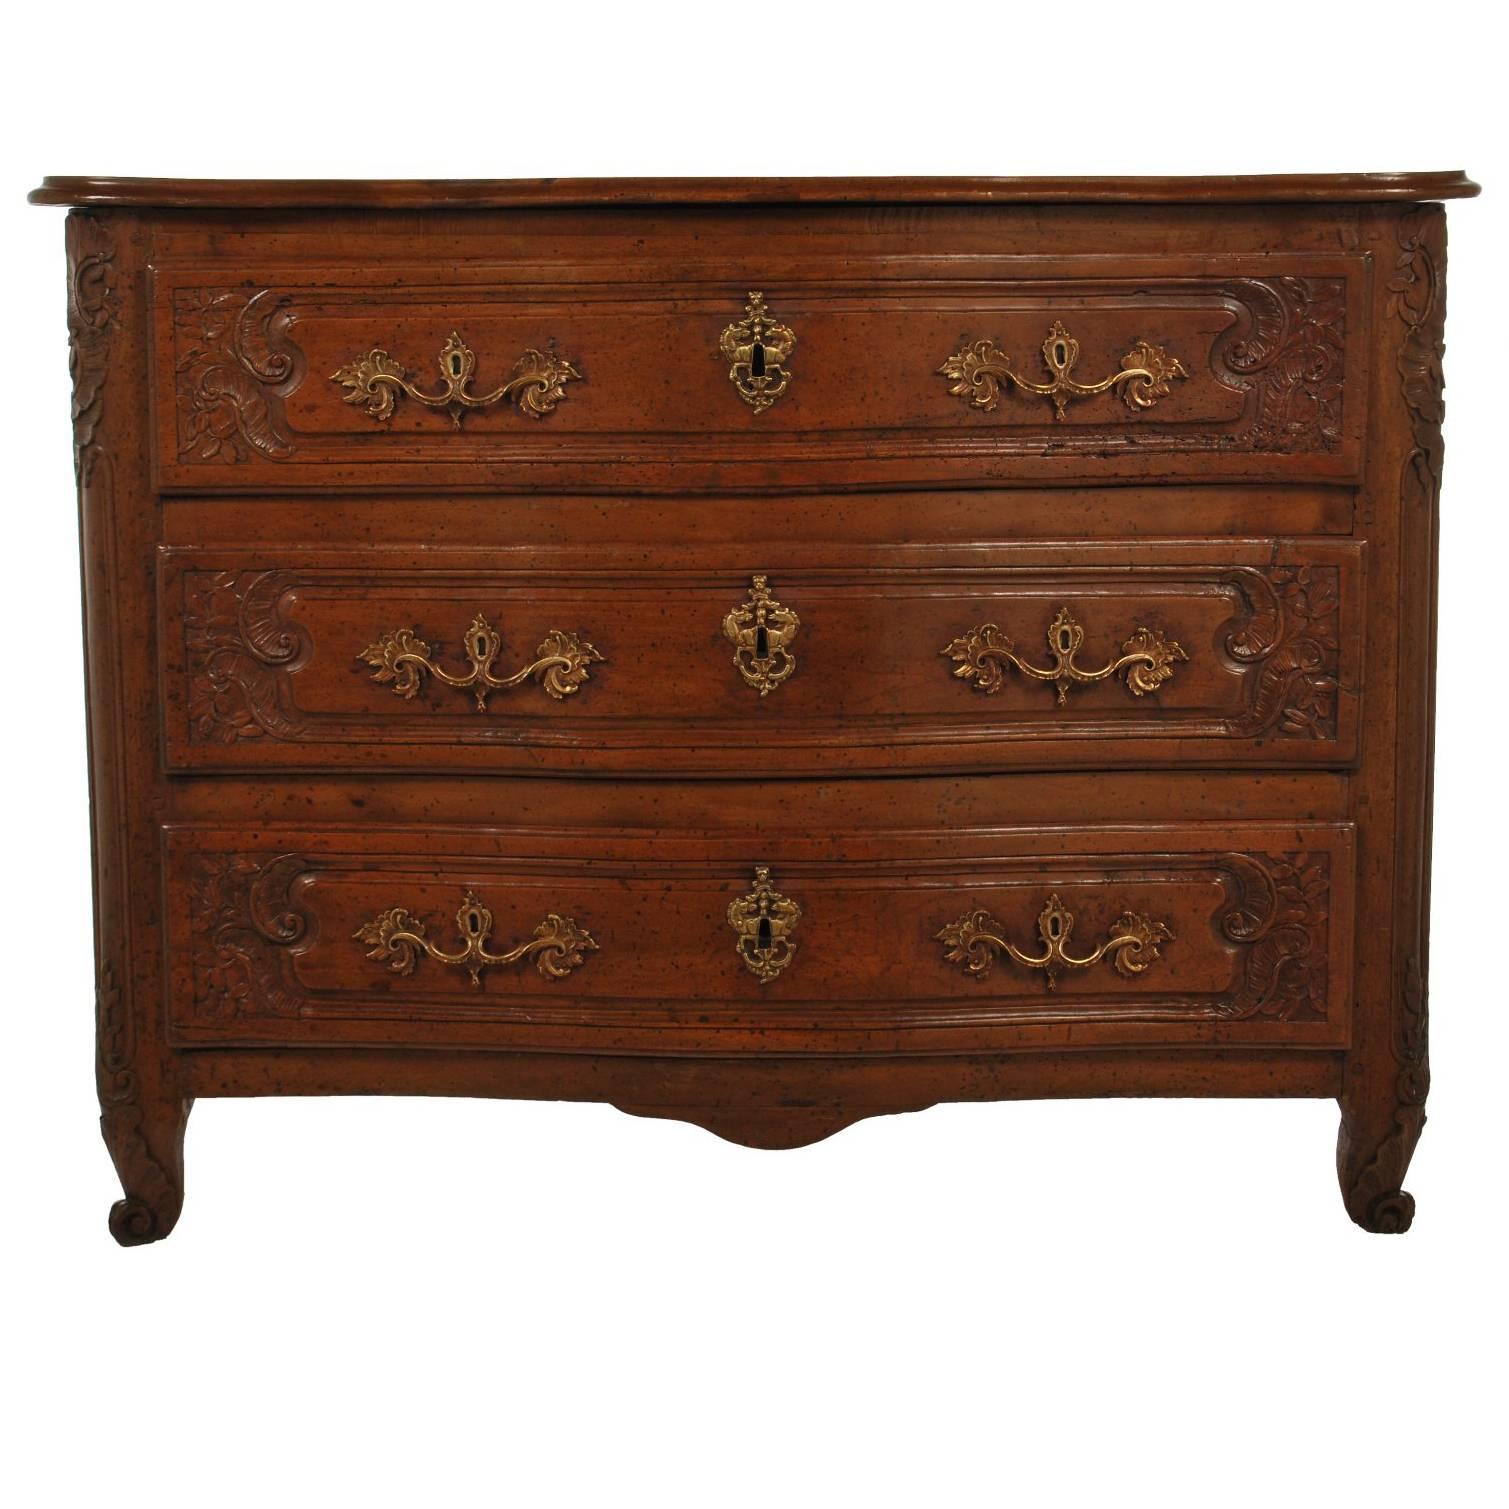 Large 18th Century French Louis XV Period Walnut Commode or Chest of Drawers For Sale